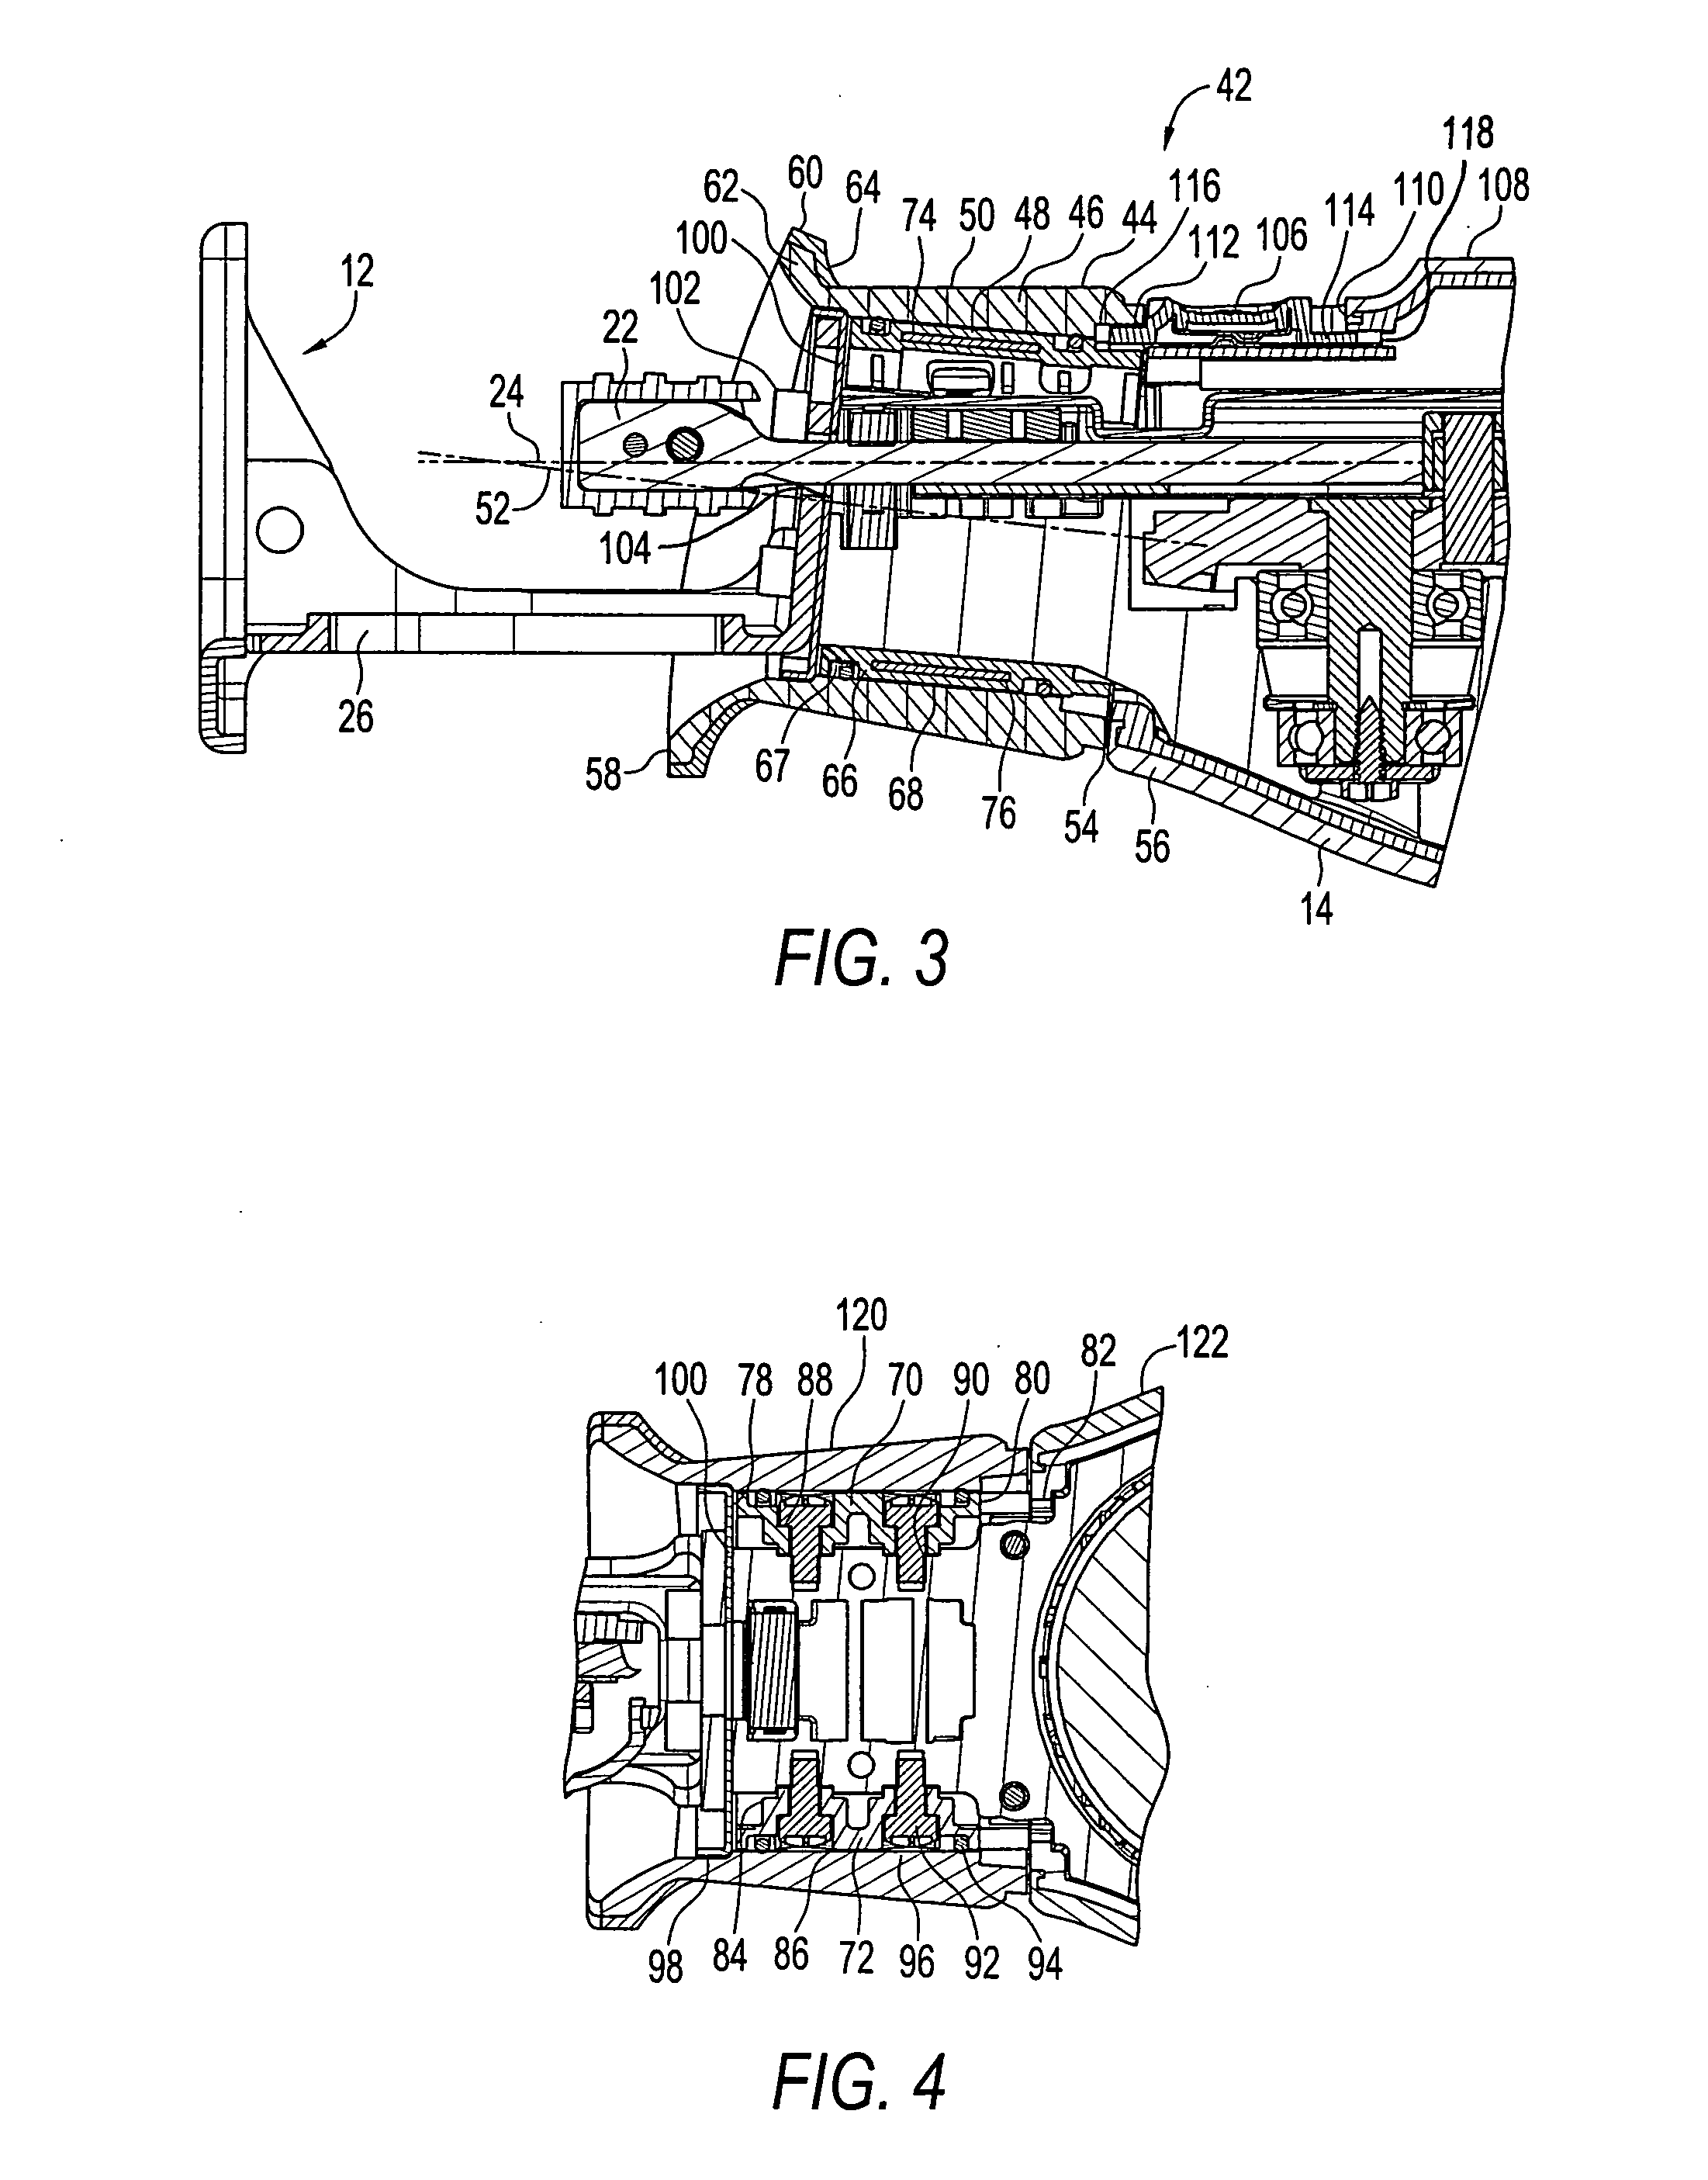 Scroll collar for reciprocating saw